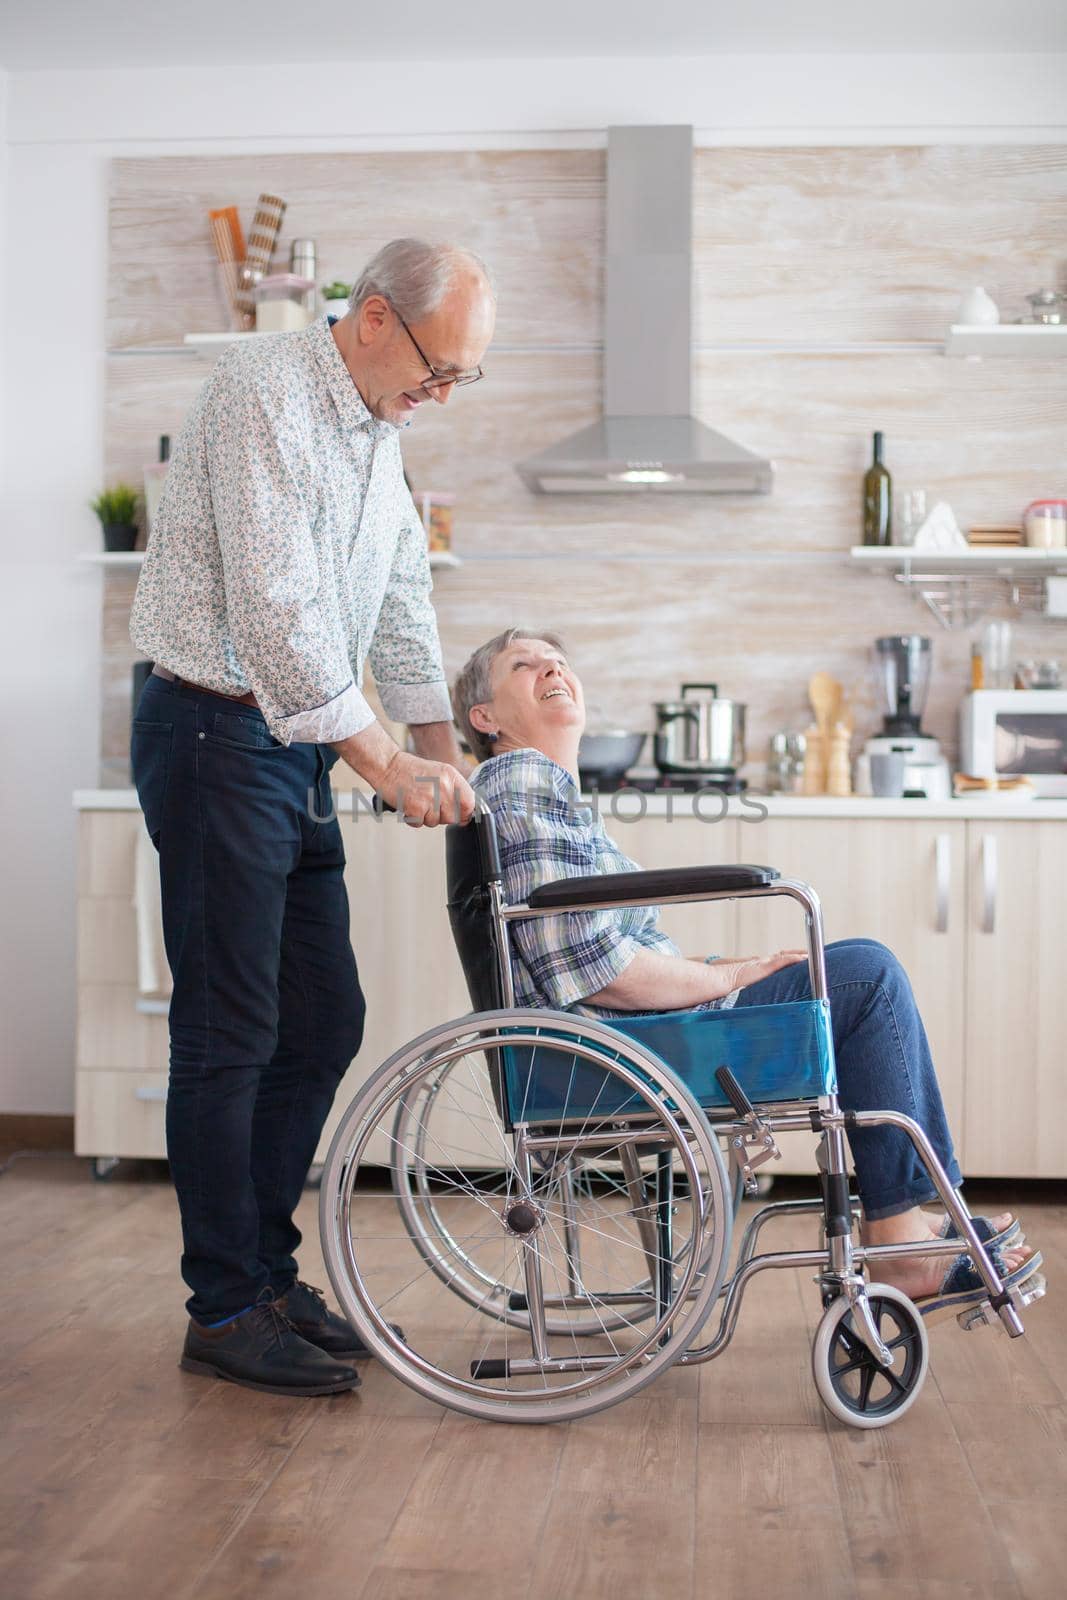 Husband looking at disabled senior woman in the kitchen. Disabled senior woman sitting in wheelchair in kitchen looking through window. Living with handicapped person. Husband helping wife with disability. Elderly couple with happy marriage.